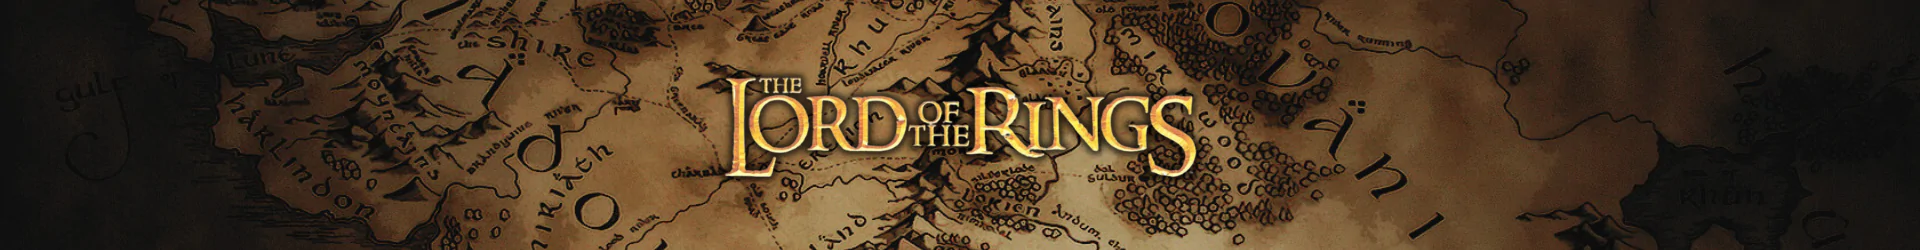 Lord of the Rings board games banner